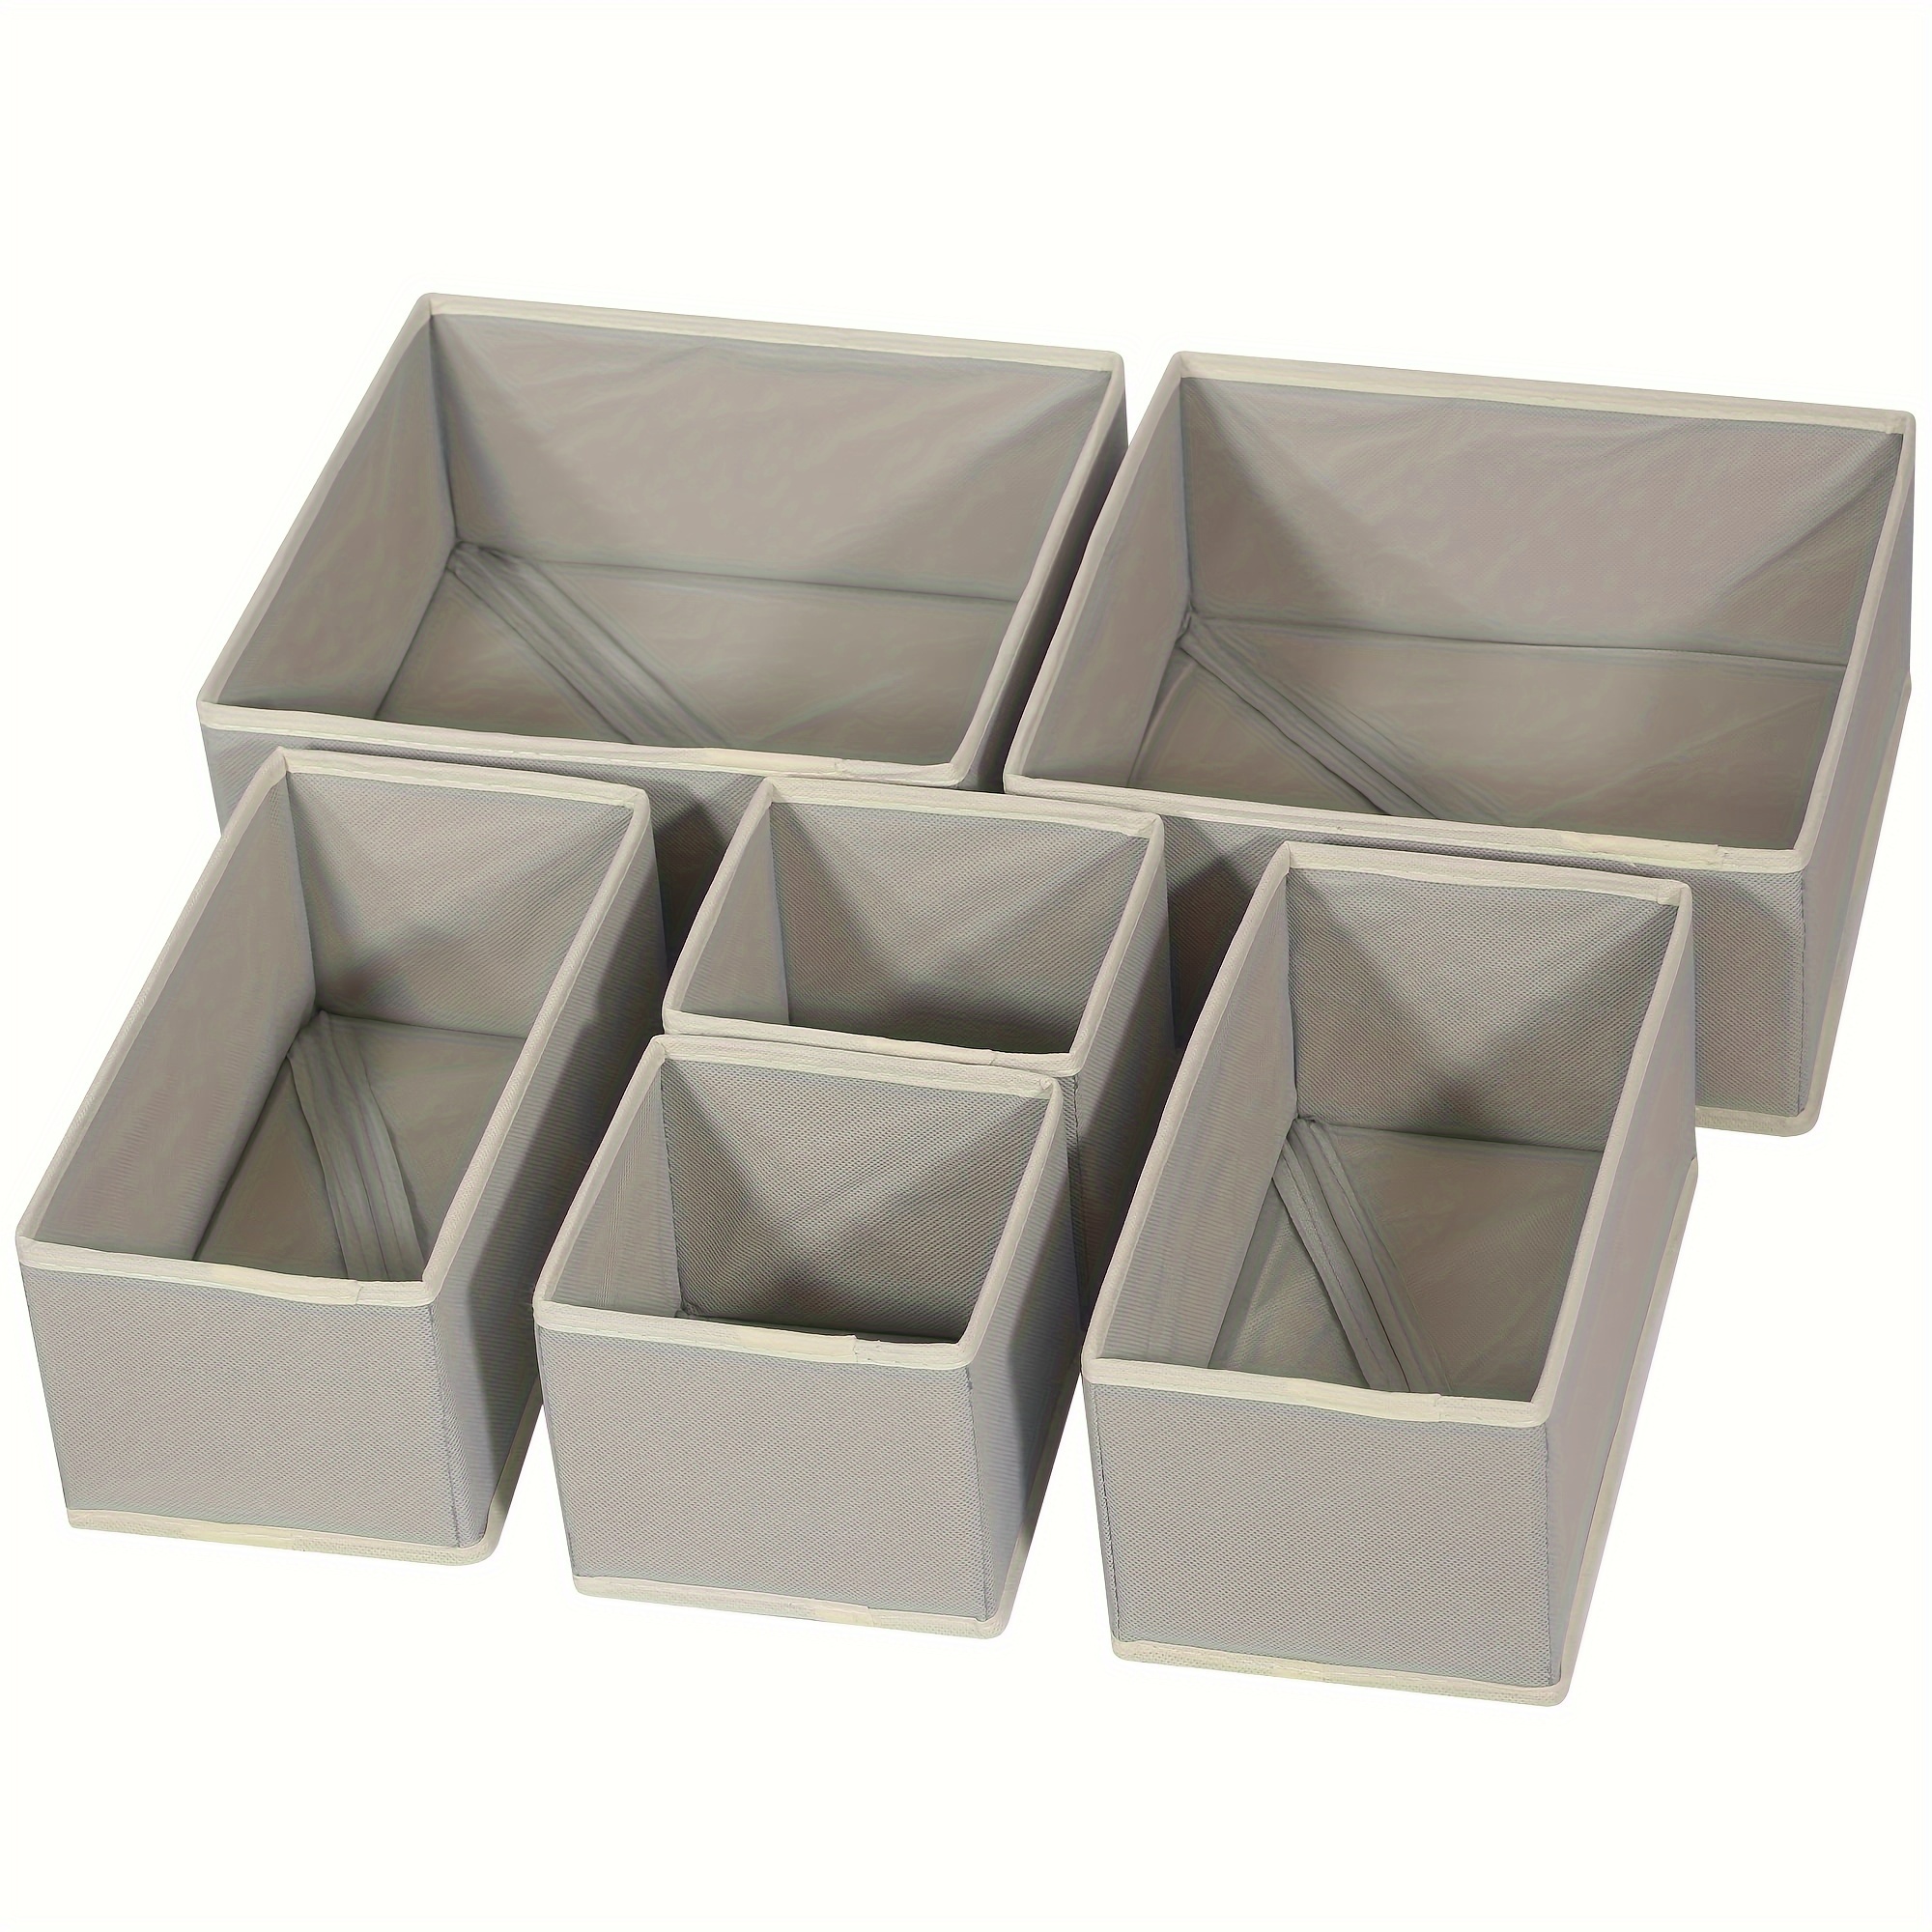 mDesign Plastic Drawer Organizer Square Box, Storage Organizer Bin  Container; For Closets, Bedrooms, Use for Leggings, Socks, Ties, Jewelry